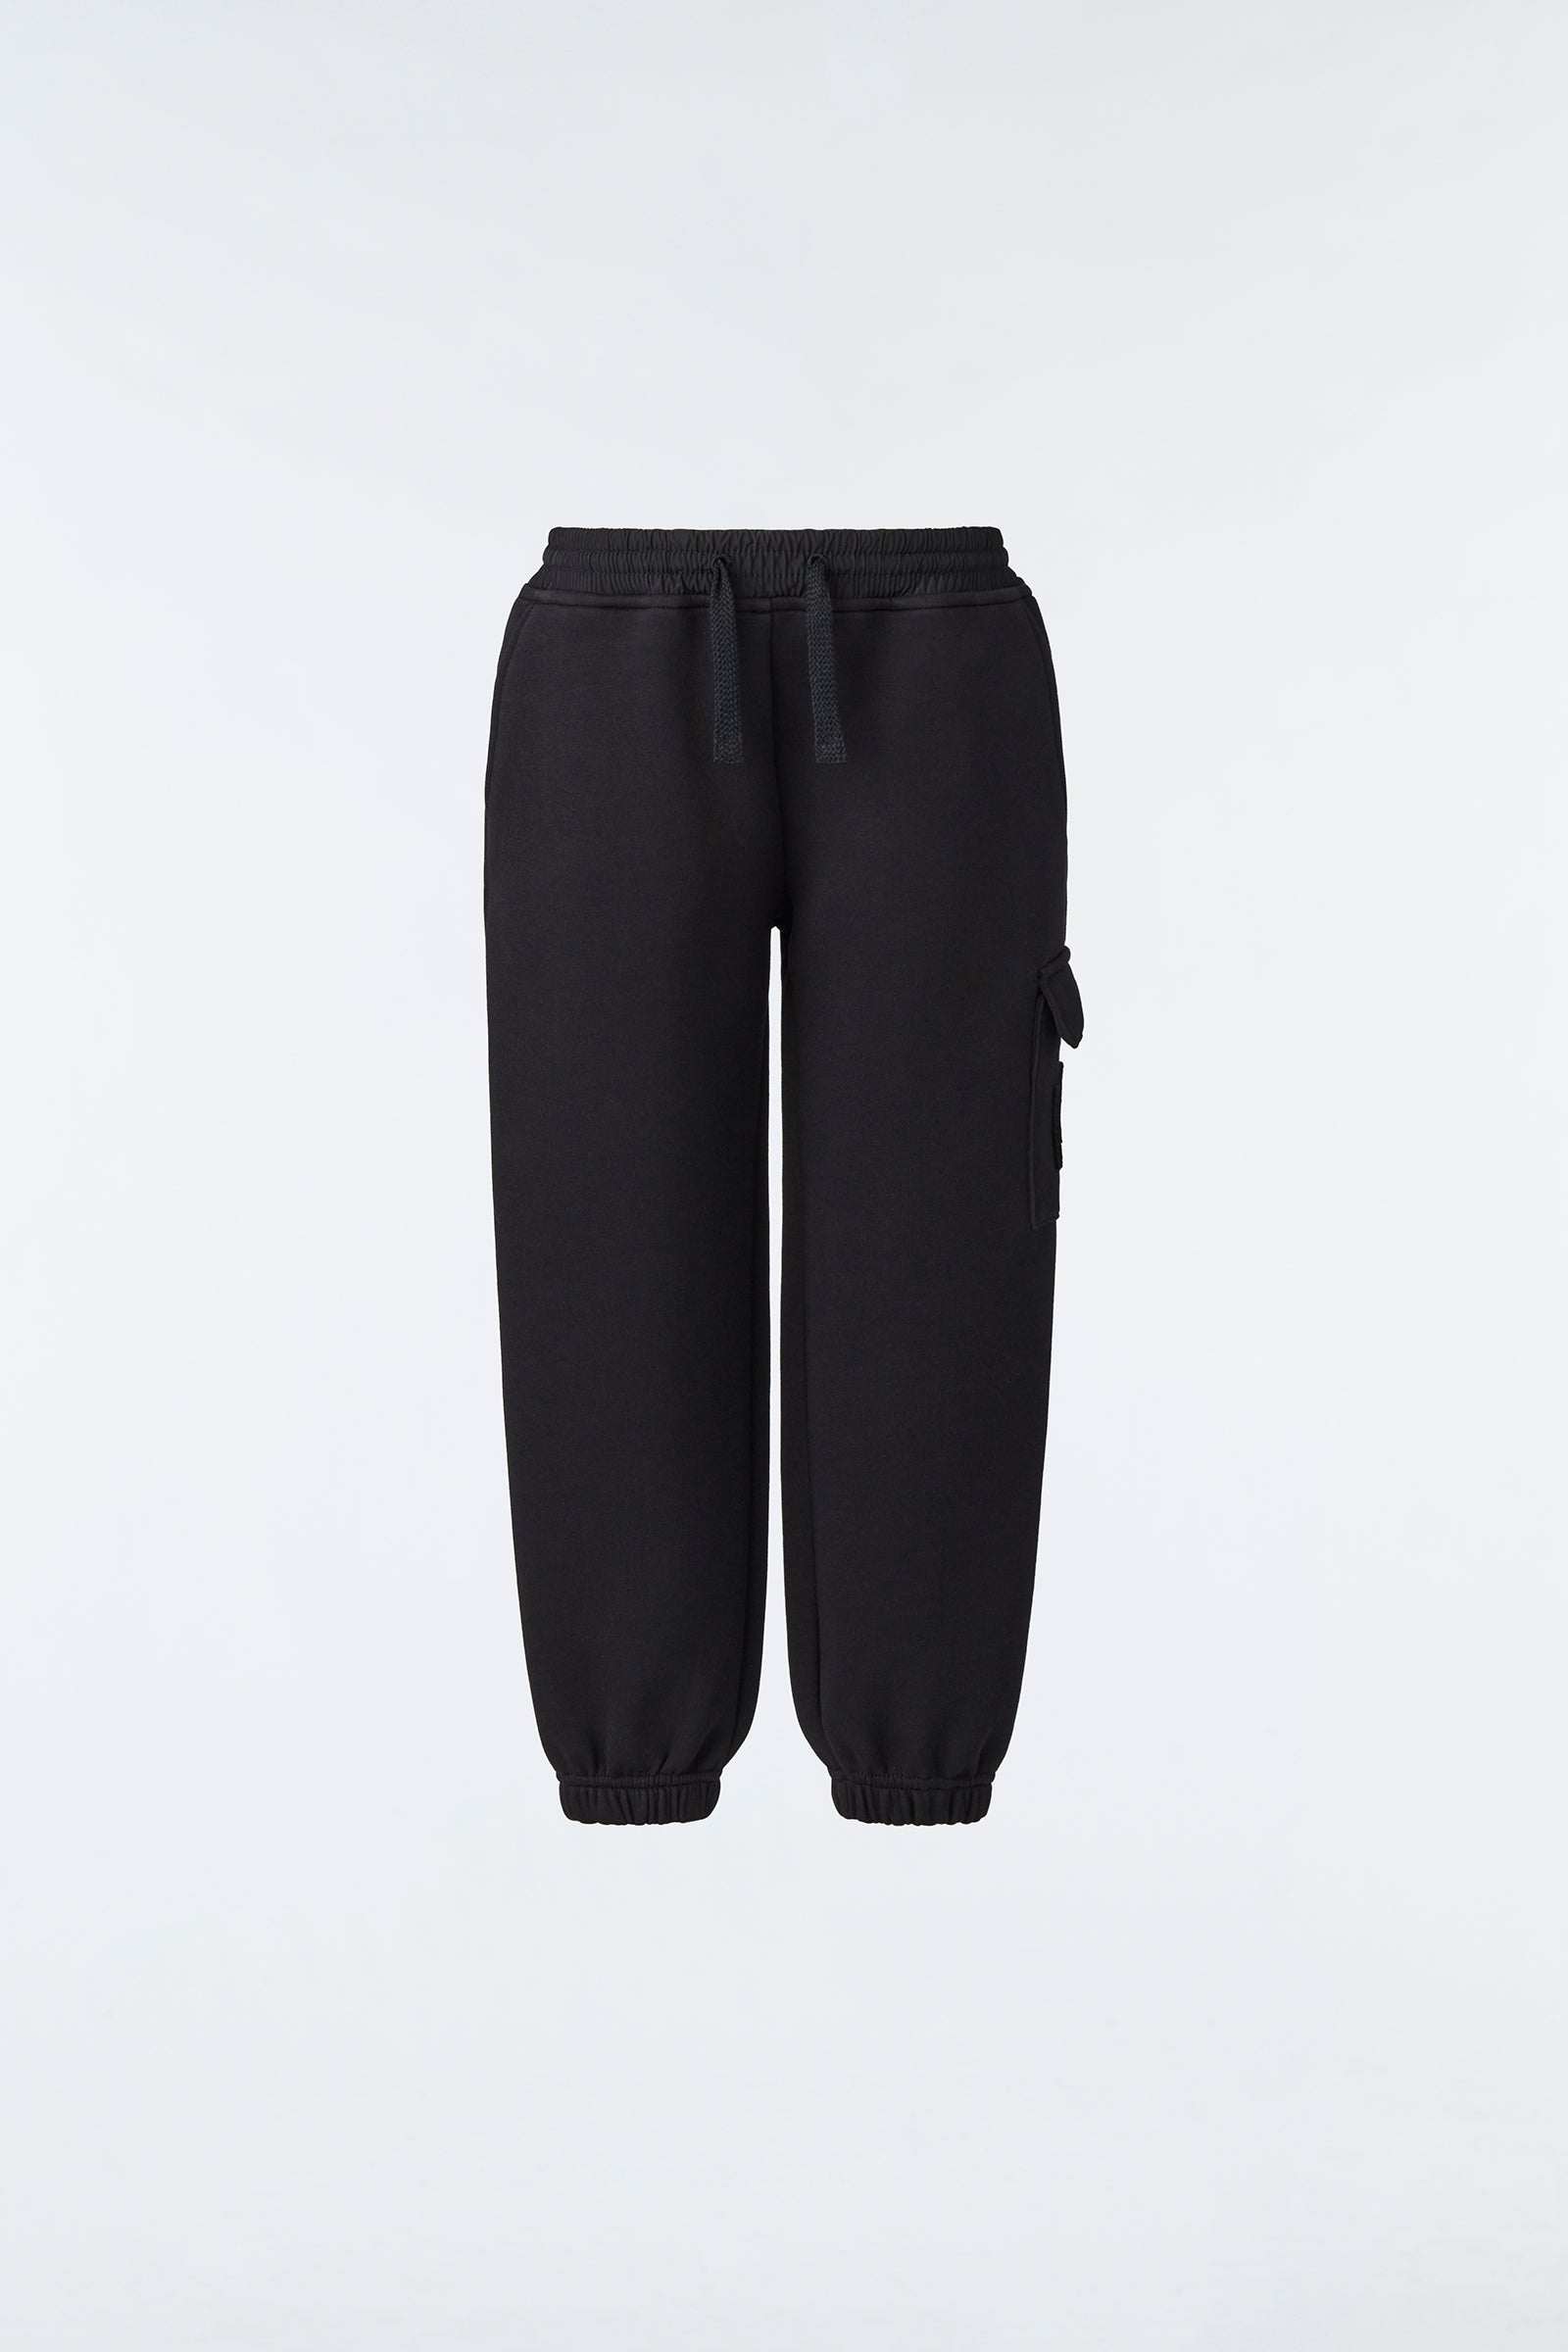 Archer, Double-face jersey sweatpants for kids (8-14 years)